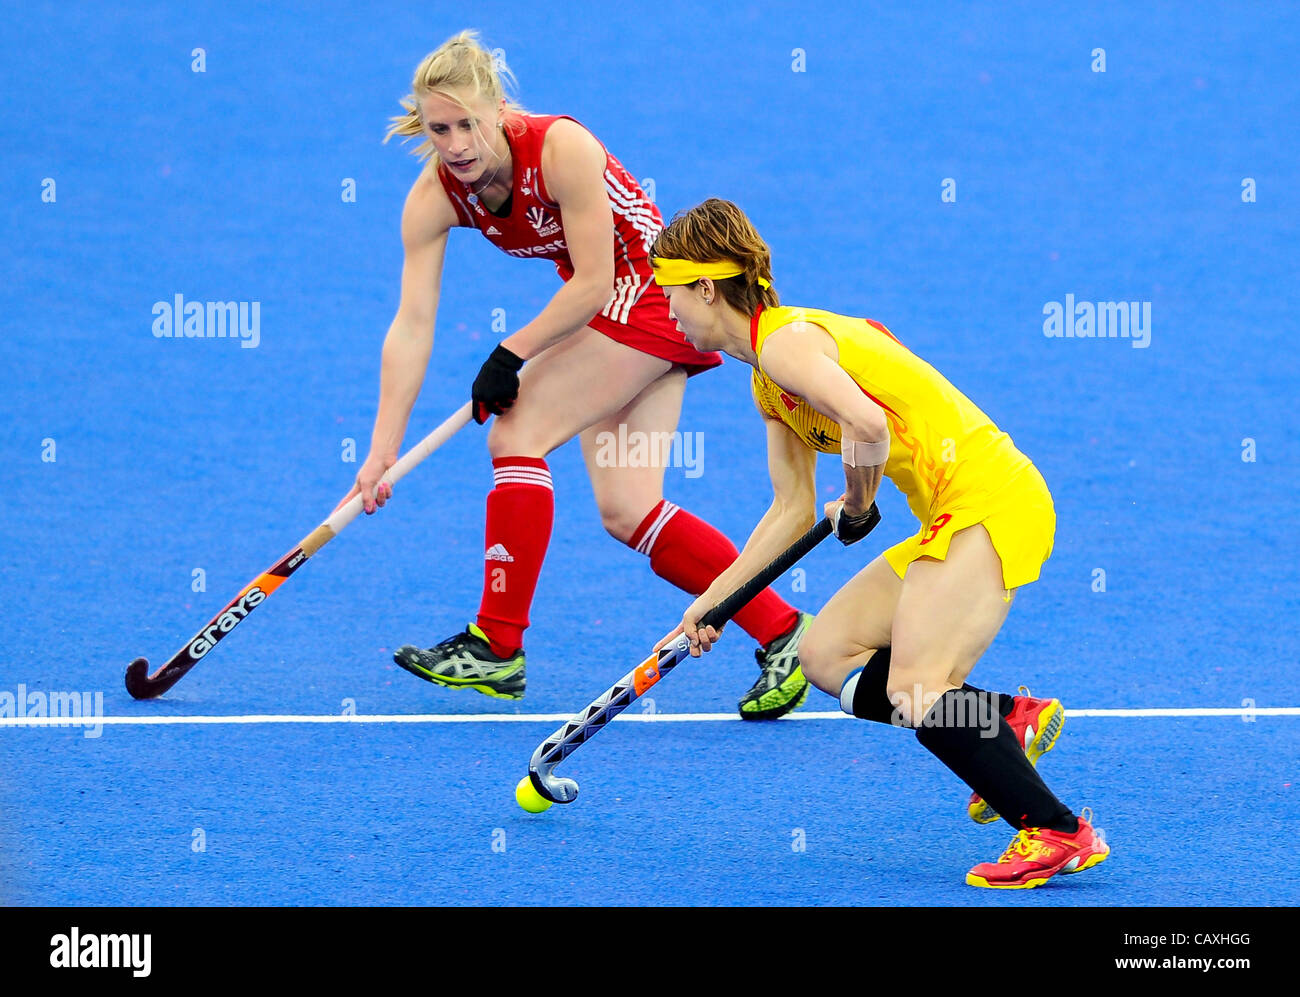 03.05.2012 London, England. China Forward # 8 Baorong FU (CHN) dribbles towards Great Britain Midfielder # 10 Susie GILBERT (GBR) during the Women’s Preliminary match between China and Great Britain on Day 2 of the Visa International Invitational Hockey Tournament at the Riverbank Arena on the Olymp Stock Photo